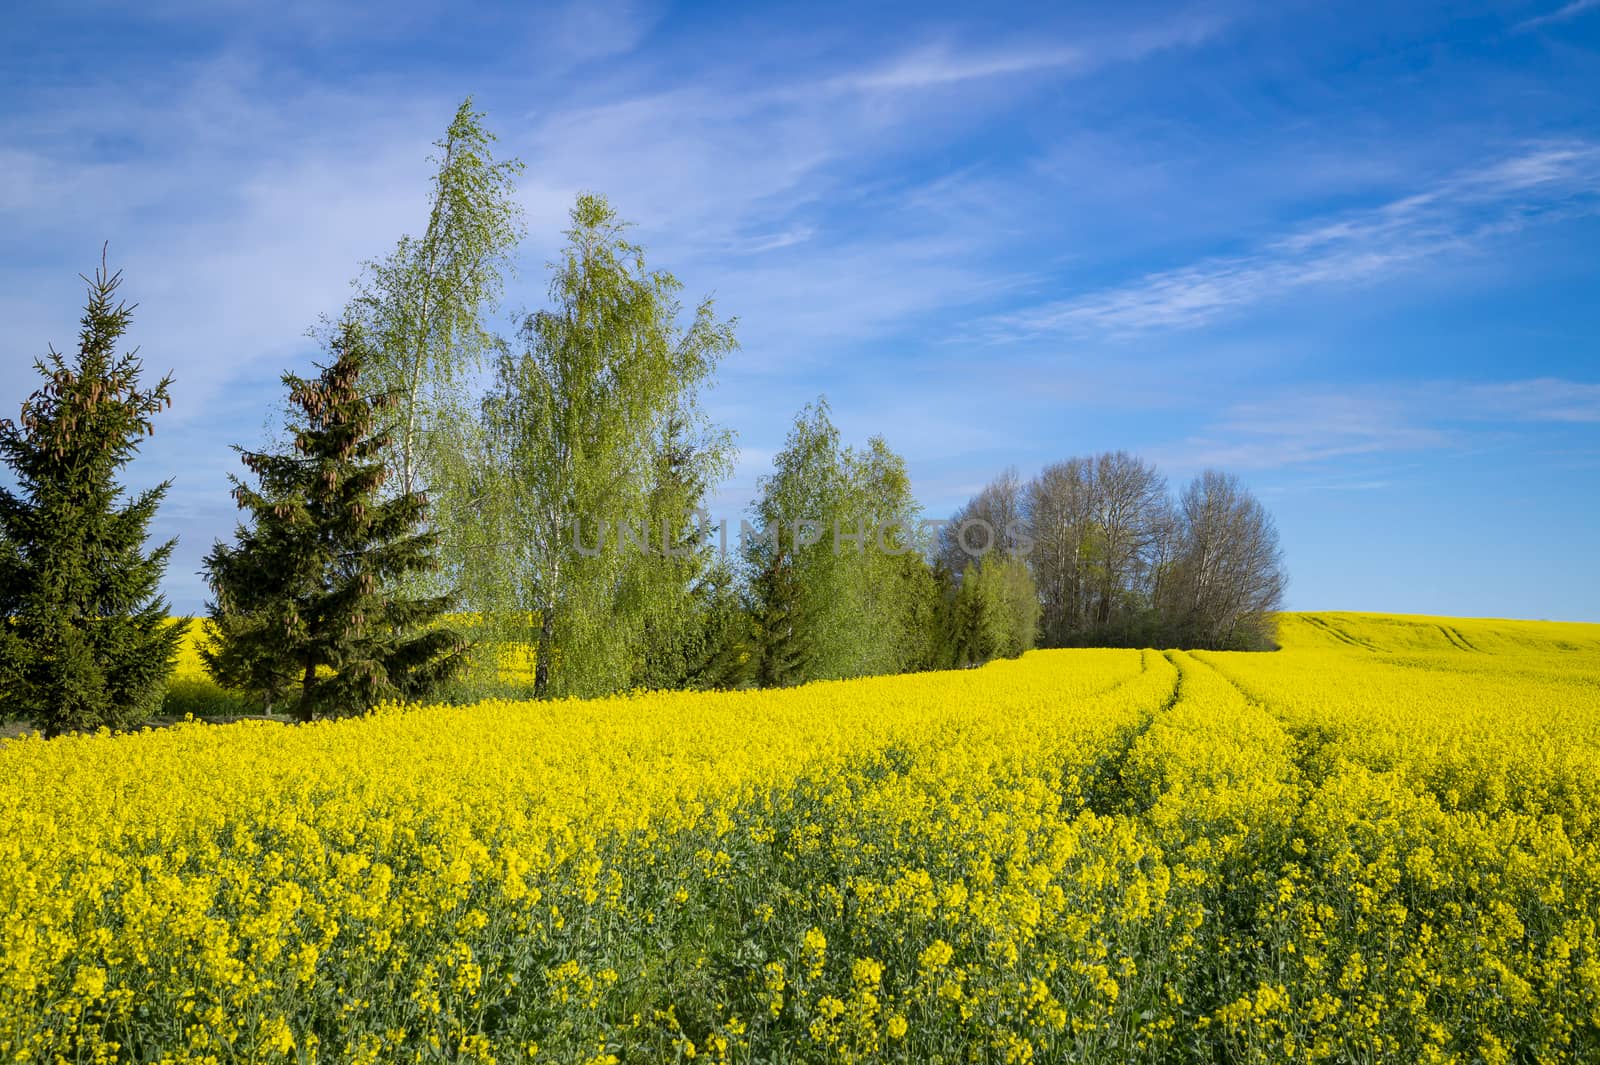 Vivid colors of yellow field in rural landscape with two distant standalone trees under blue sky with white clouds